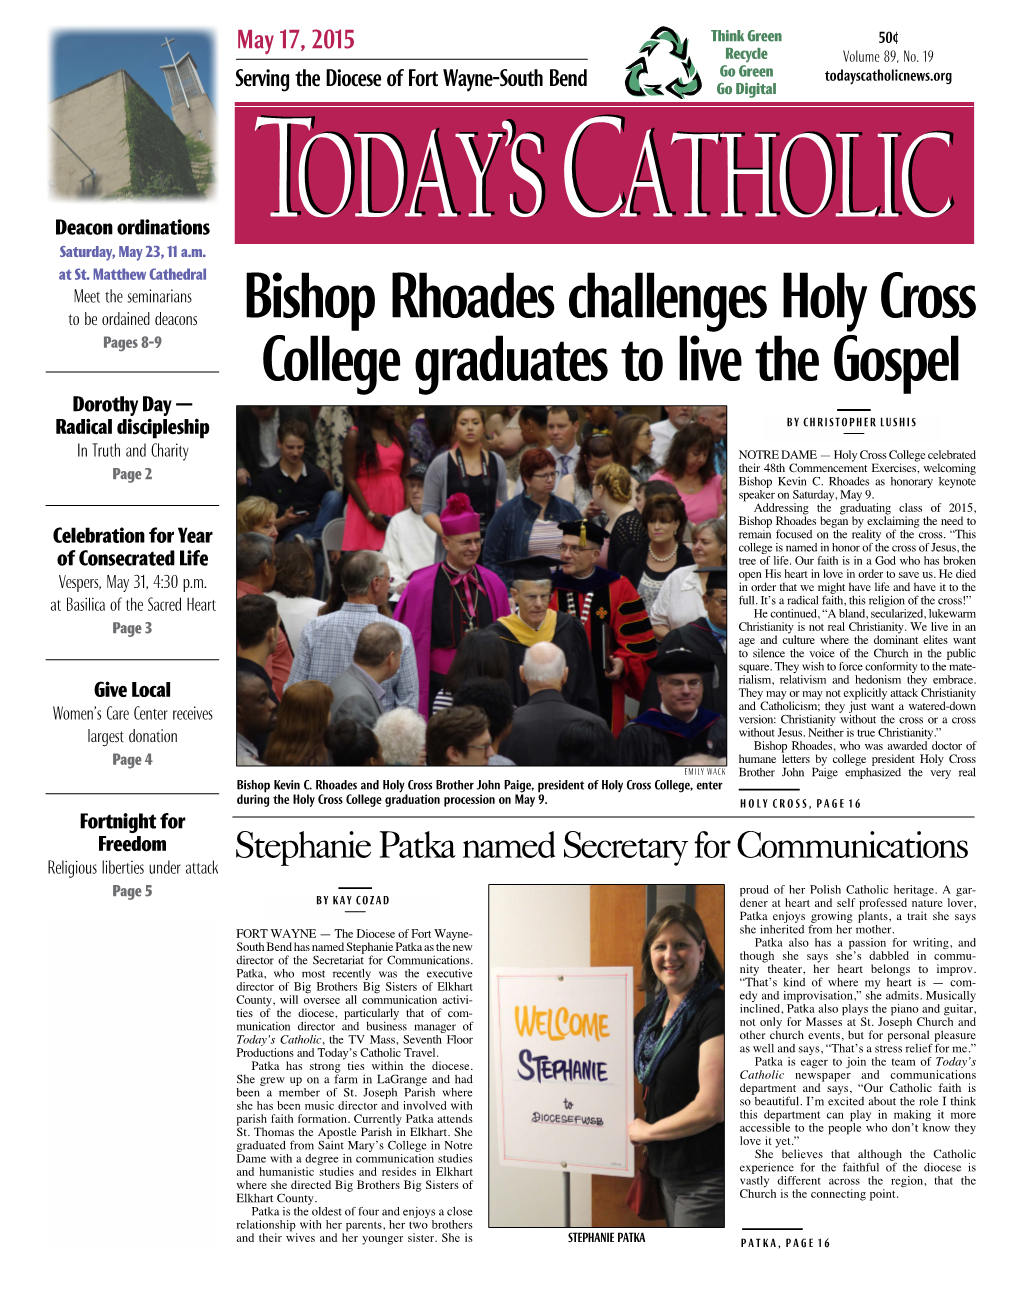 Bishop Rhoades Challenges Holy Cross College Graduates to Live The